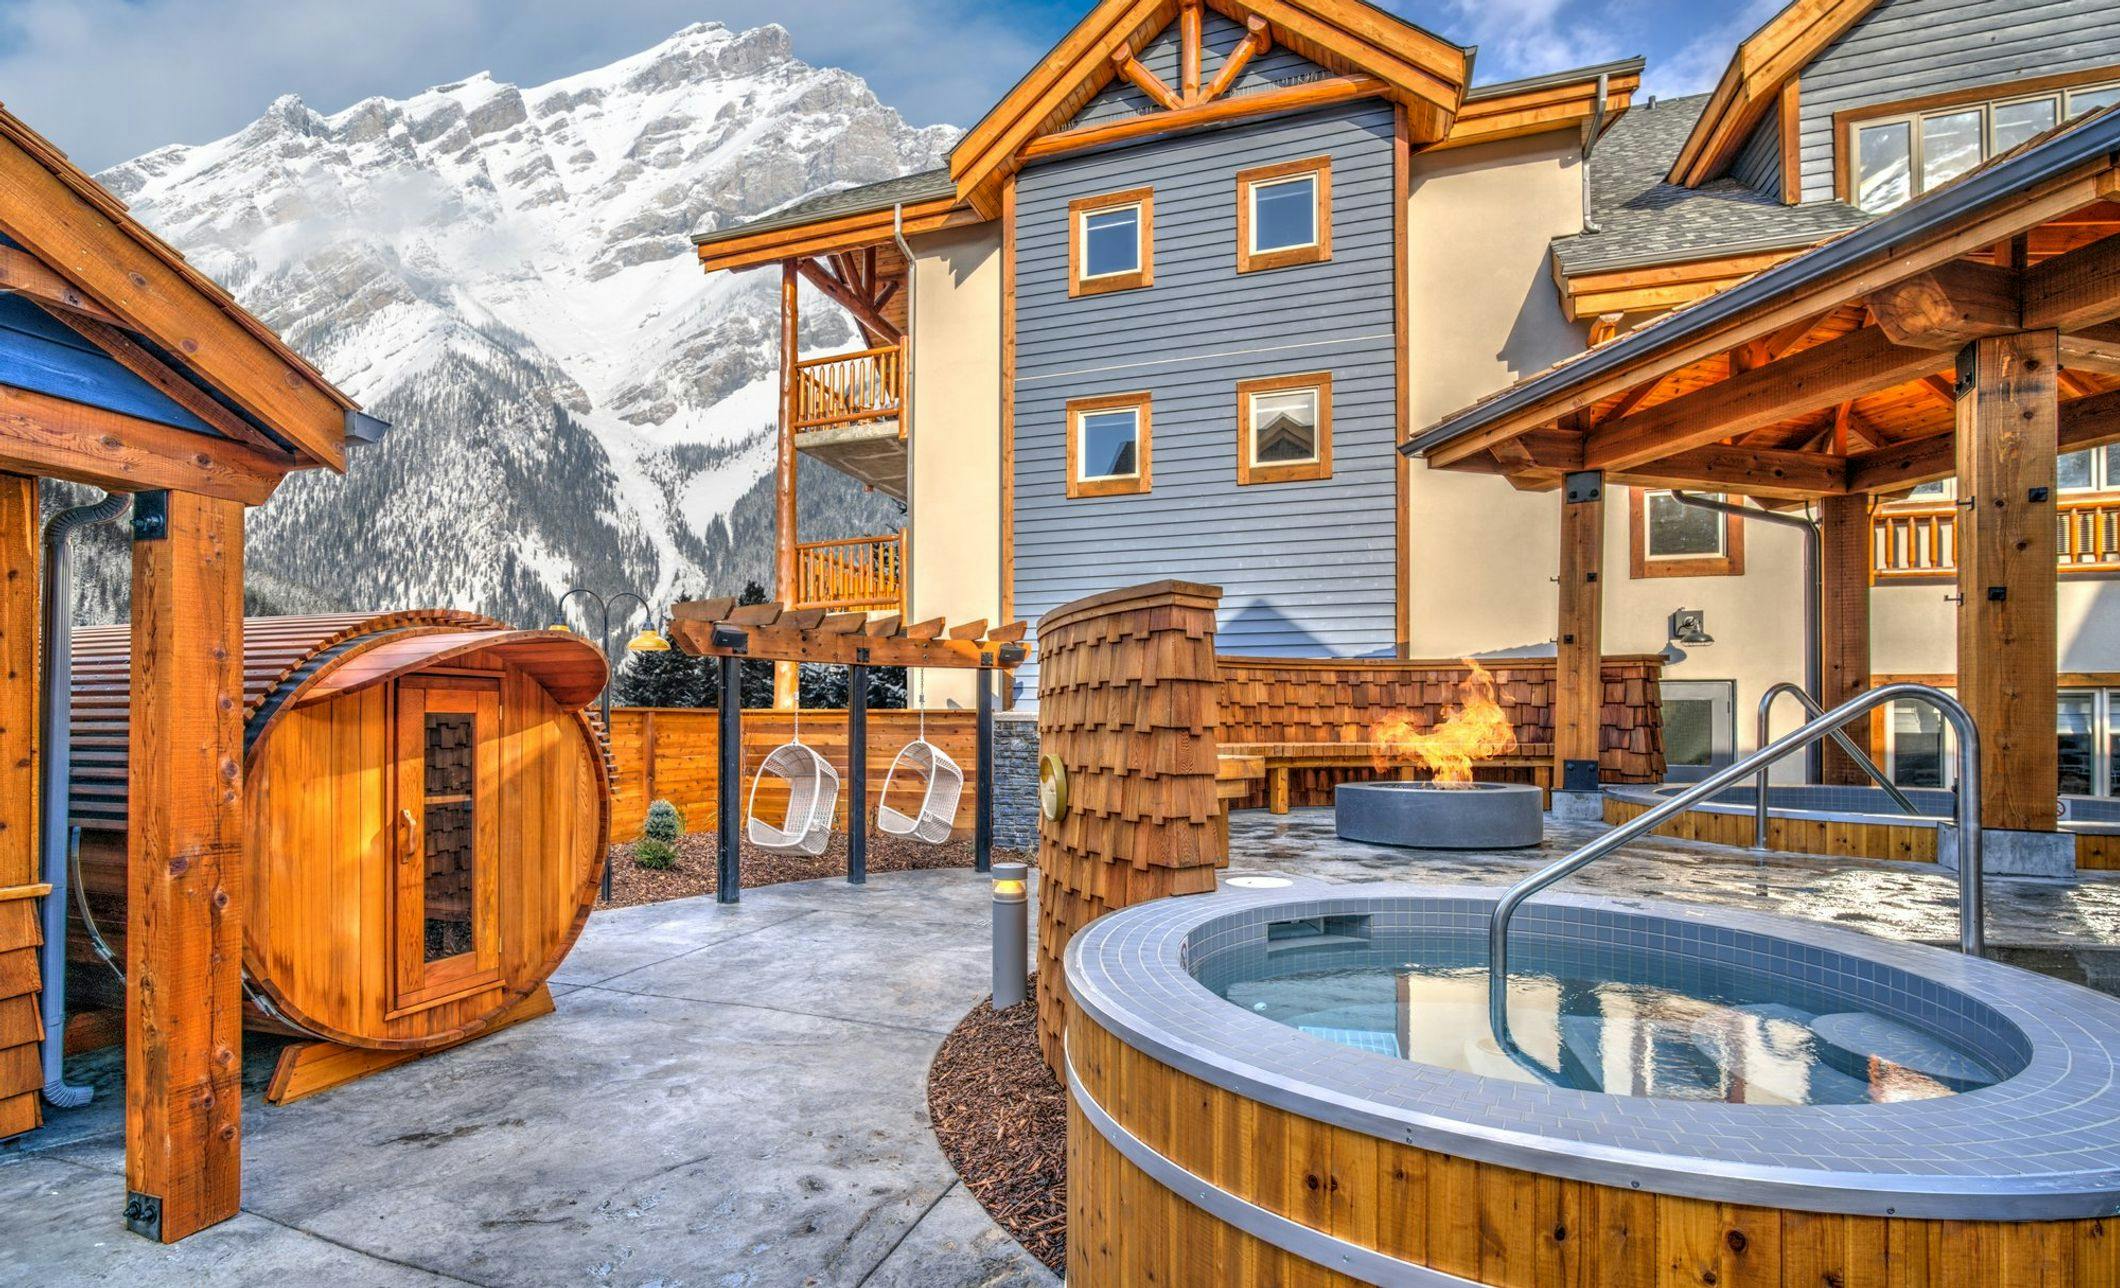 Outdoor amenities at a hotel including a hot tub, fire pit, and seating. Snow covered mountain in the background